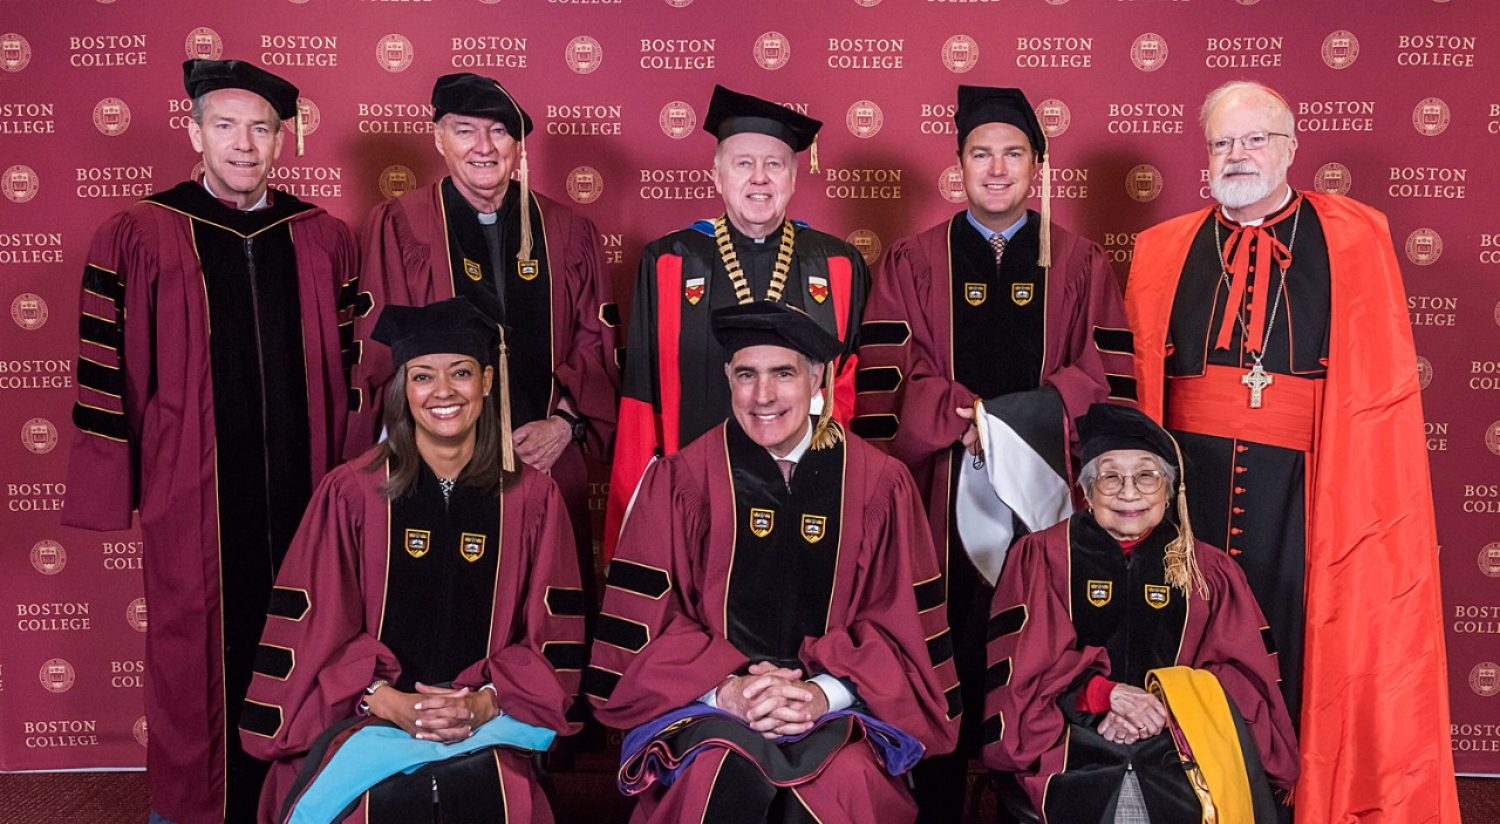 Boston College honorary degree recipients - Commencement 2017